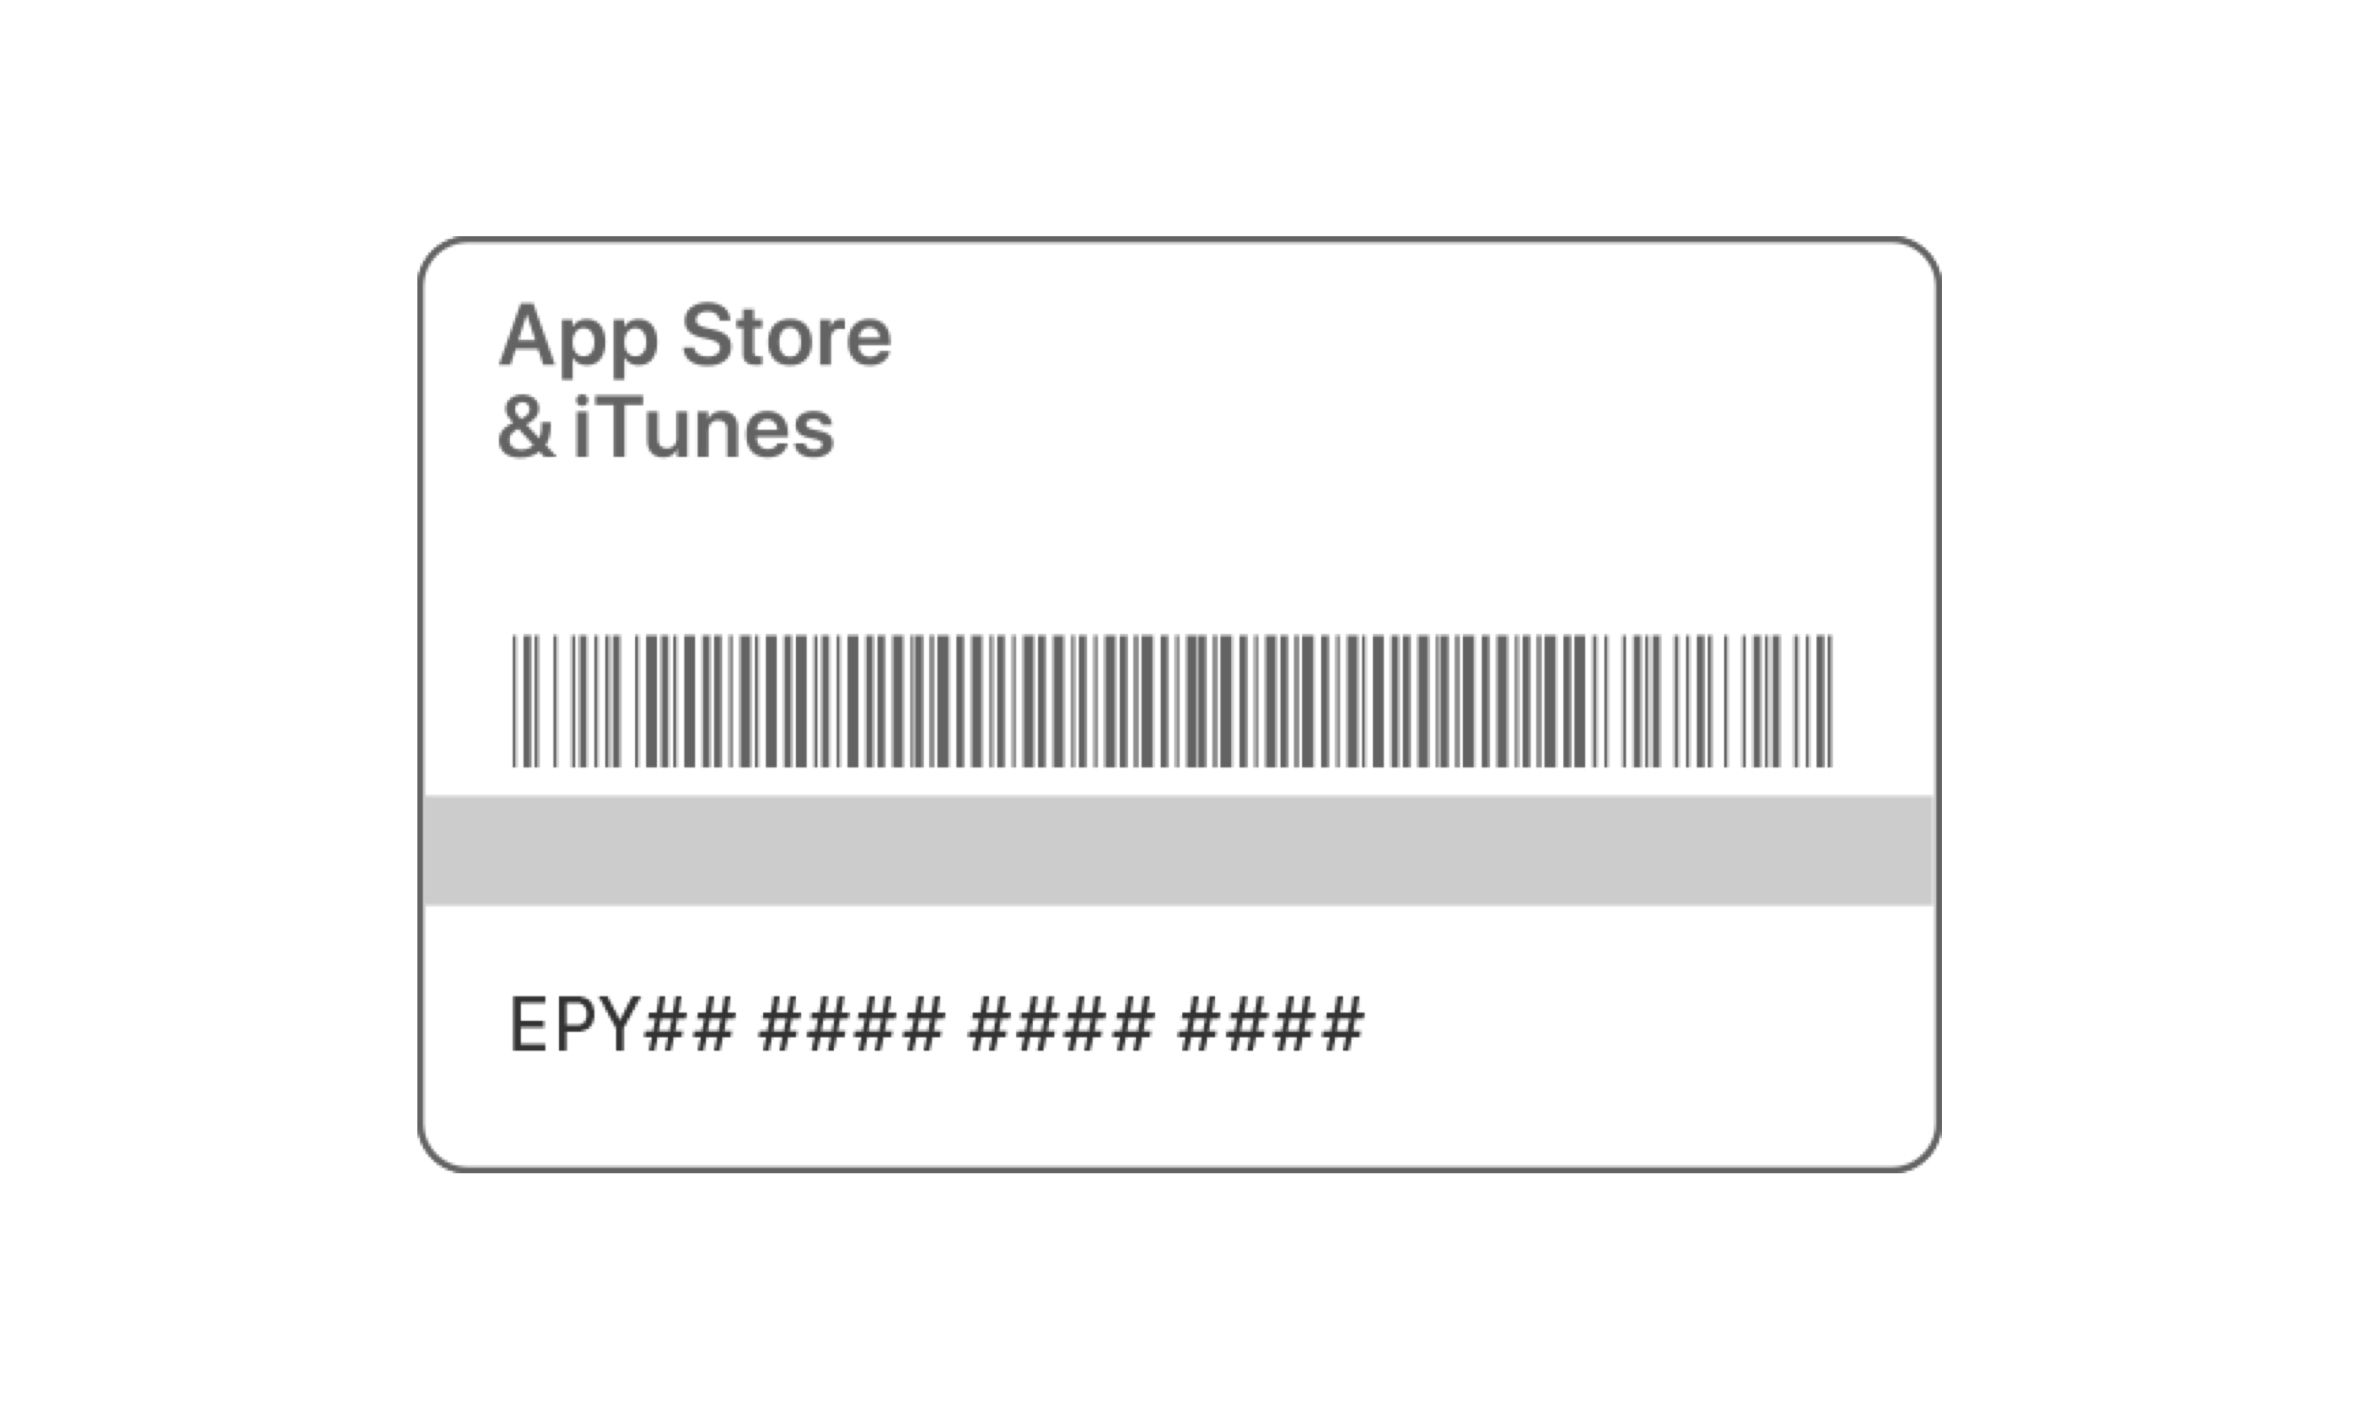 Image of an example of a serial number on an Apple gift card